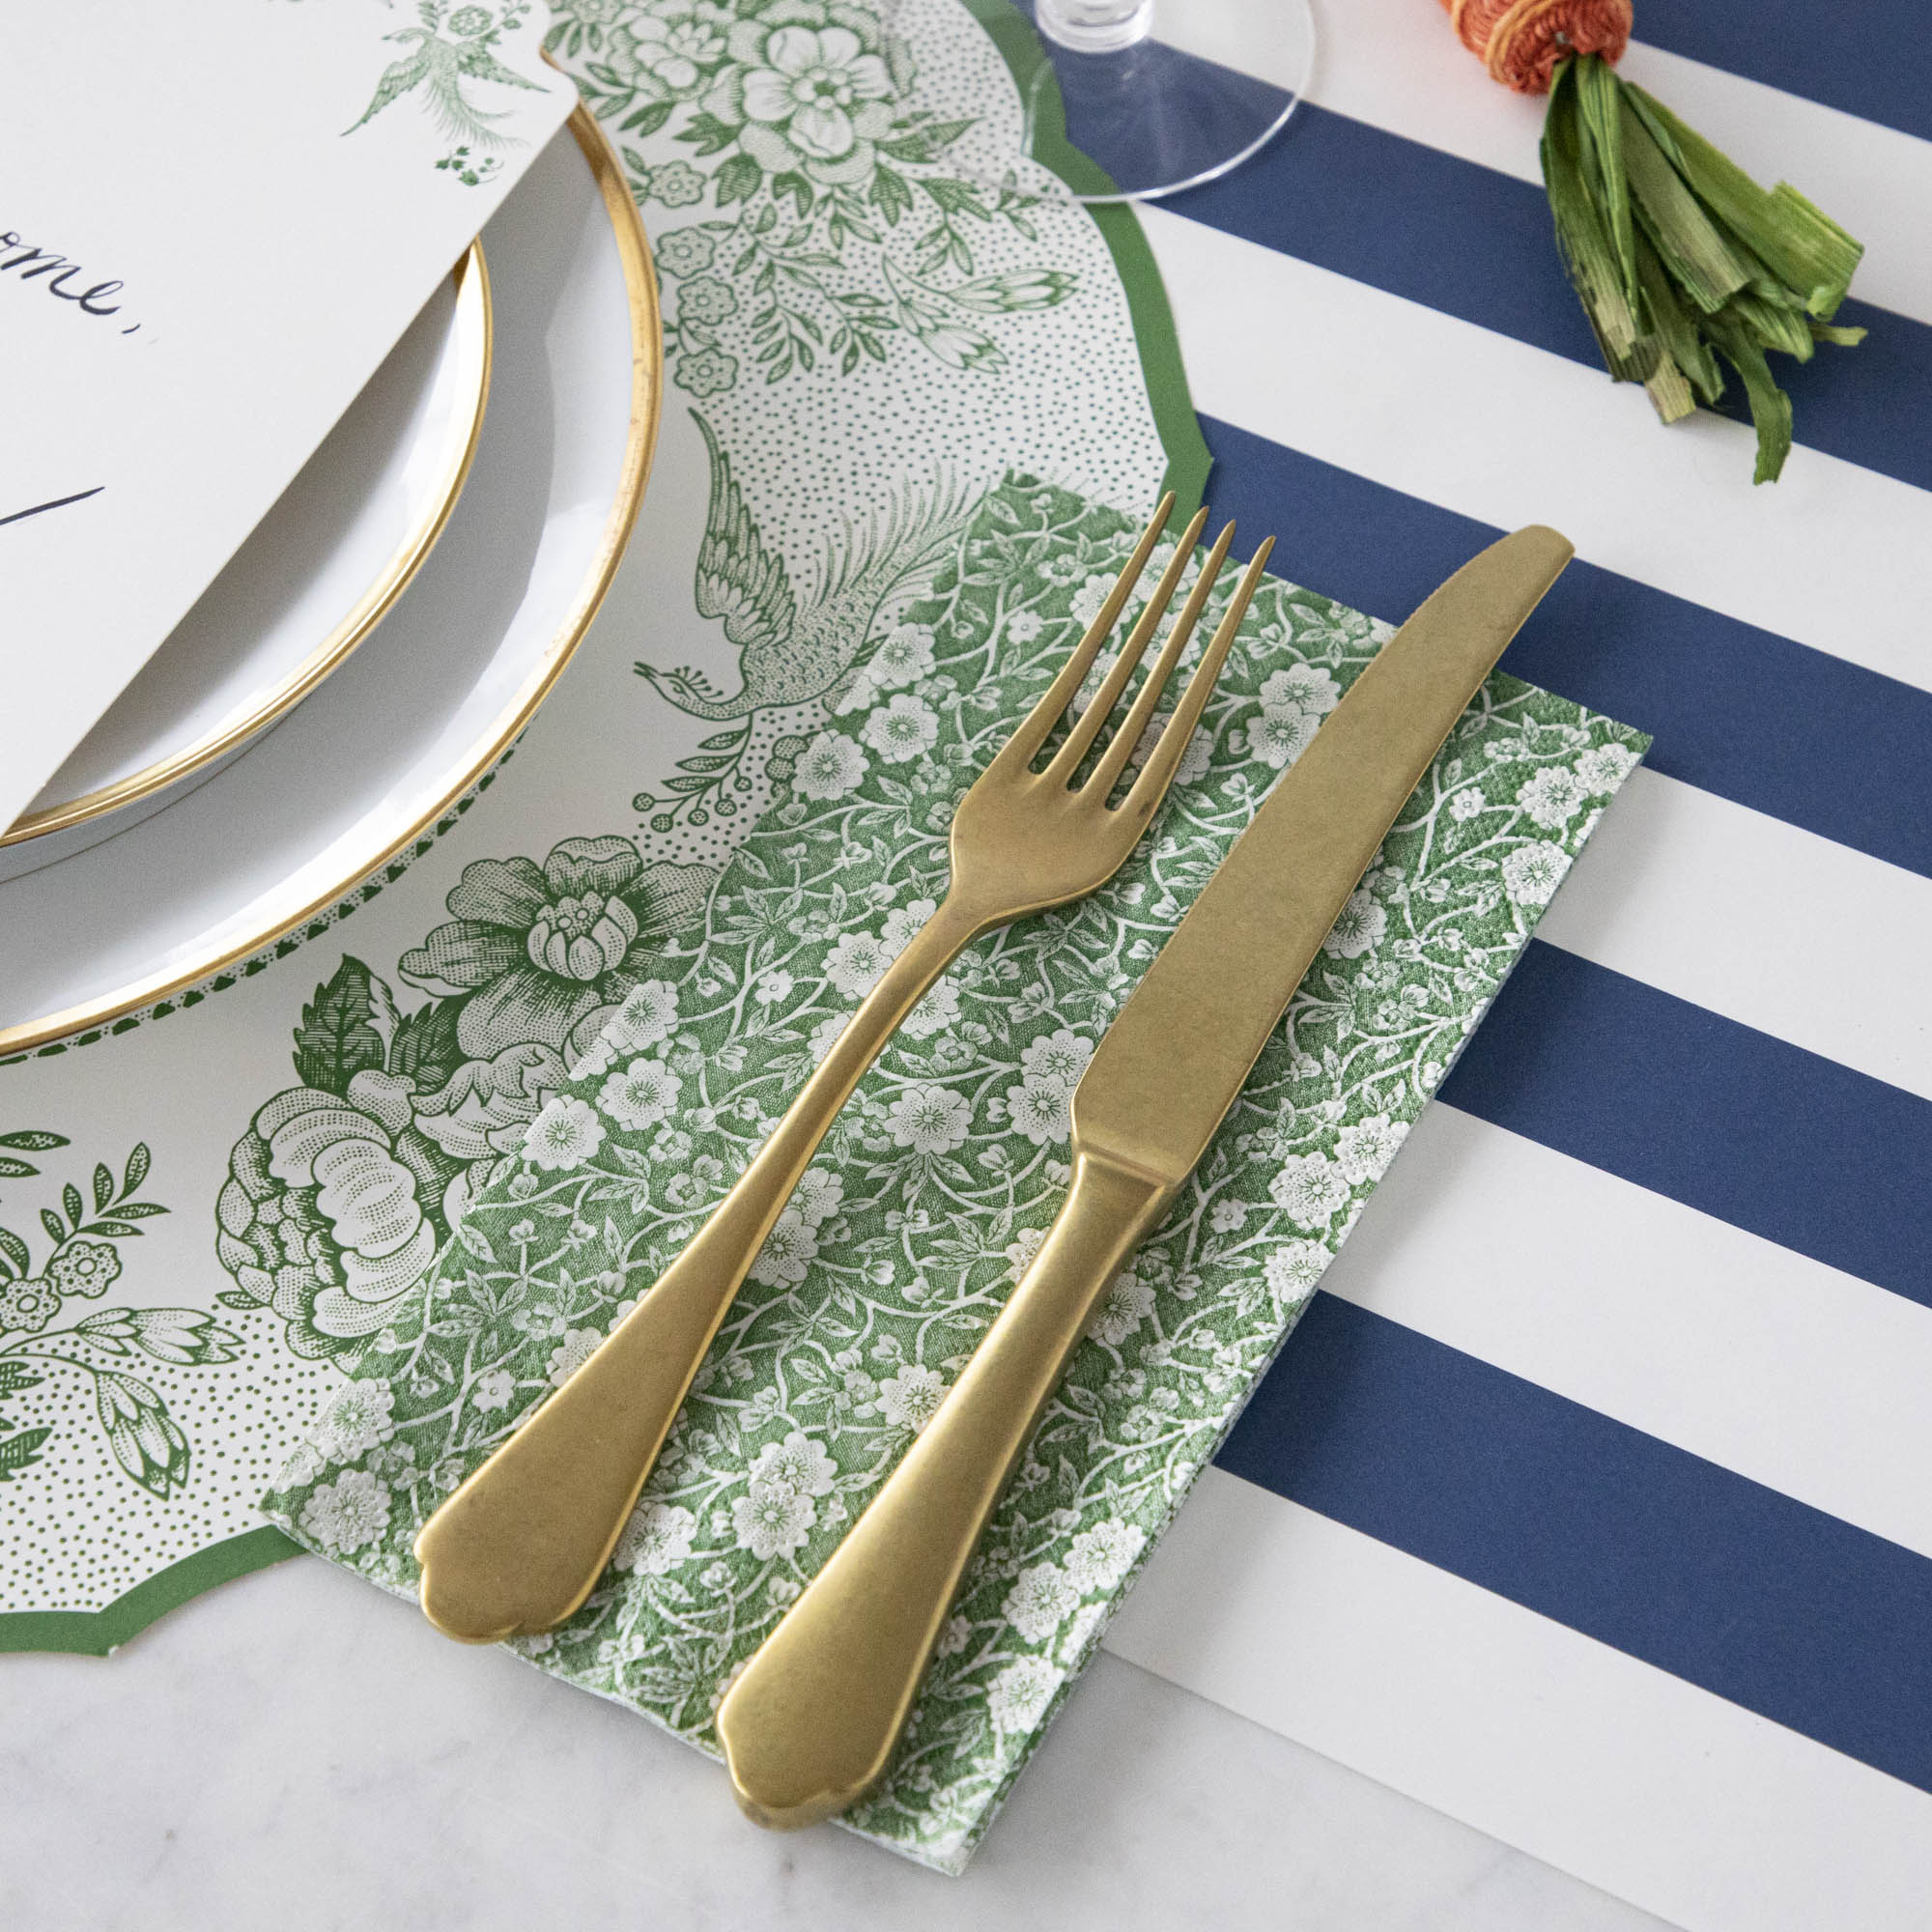 A Green Calico Guest Napkin under gold cutlery in an elegant place setting.